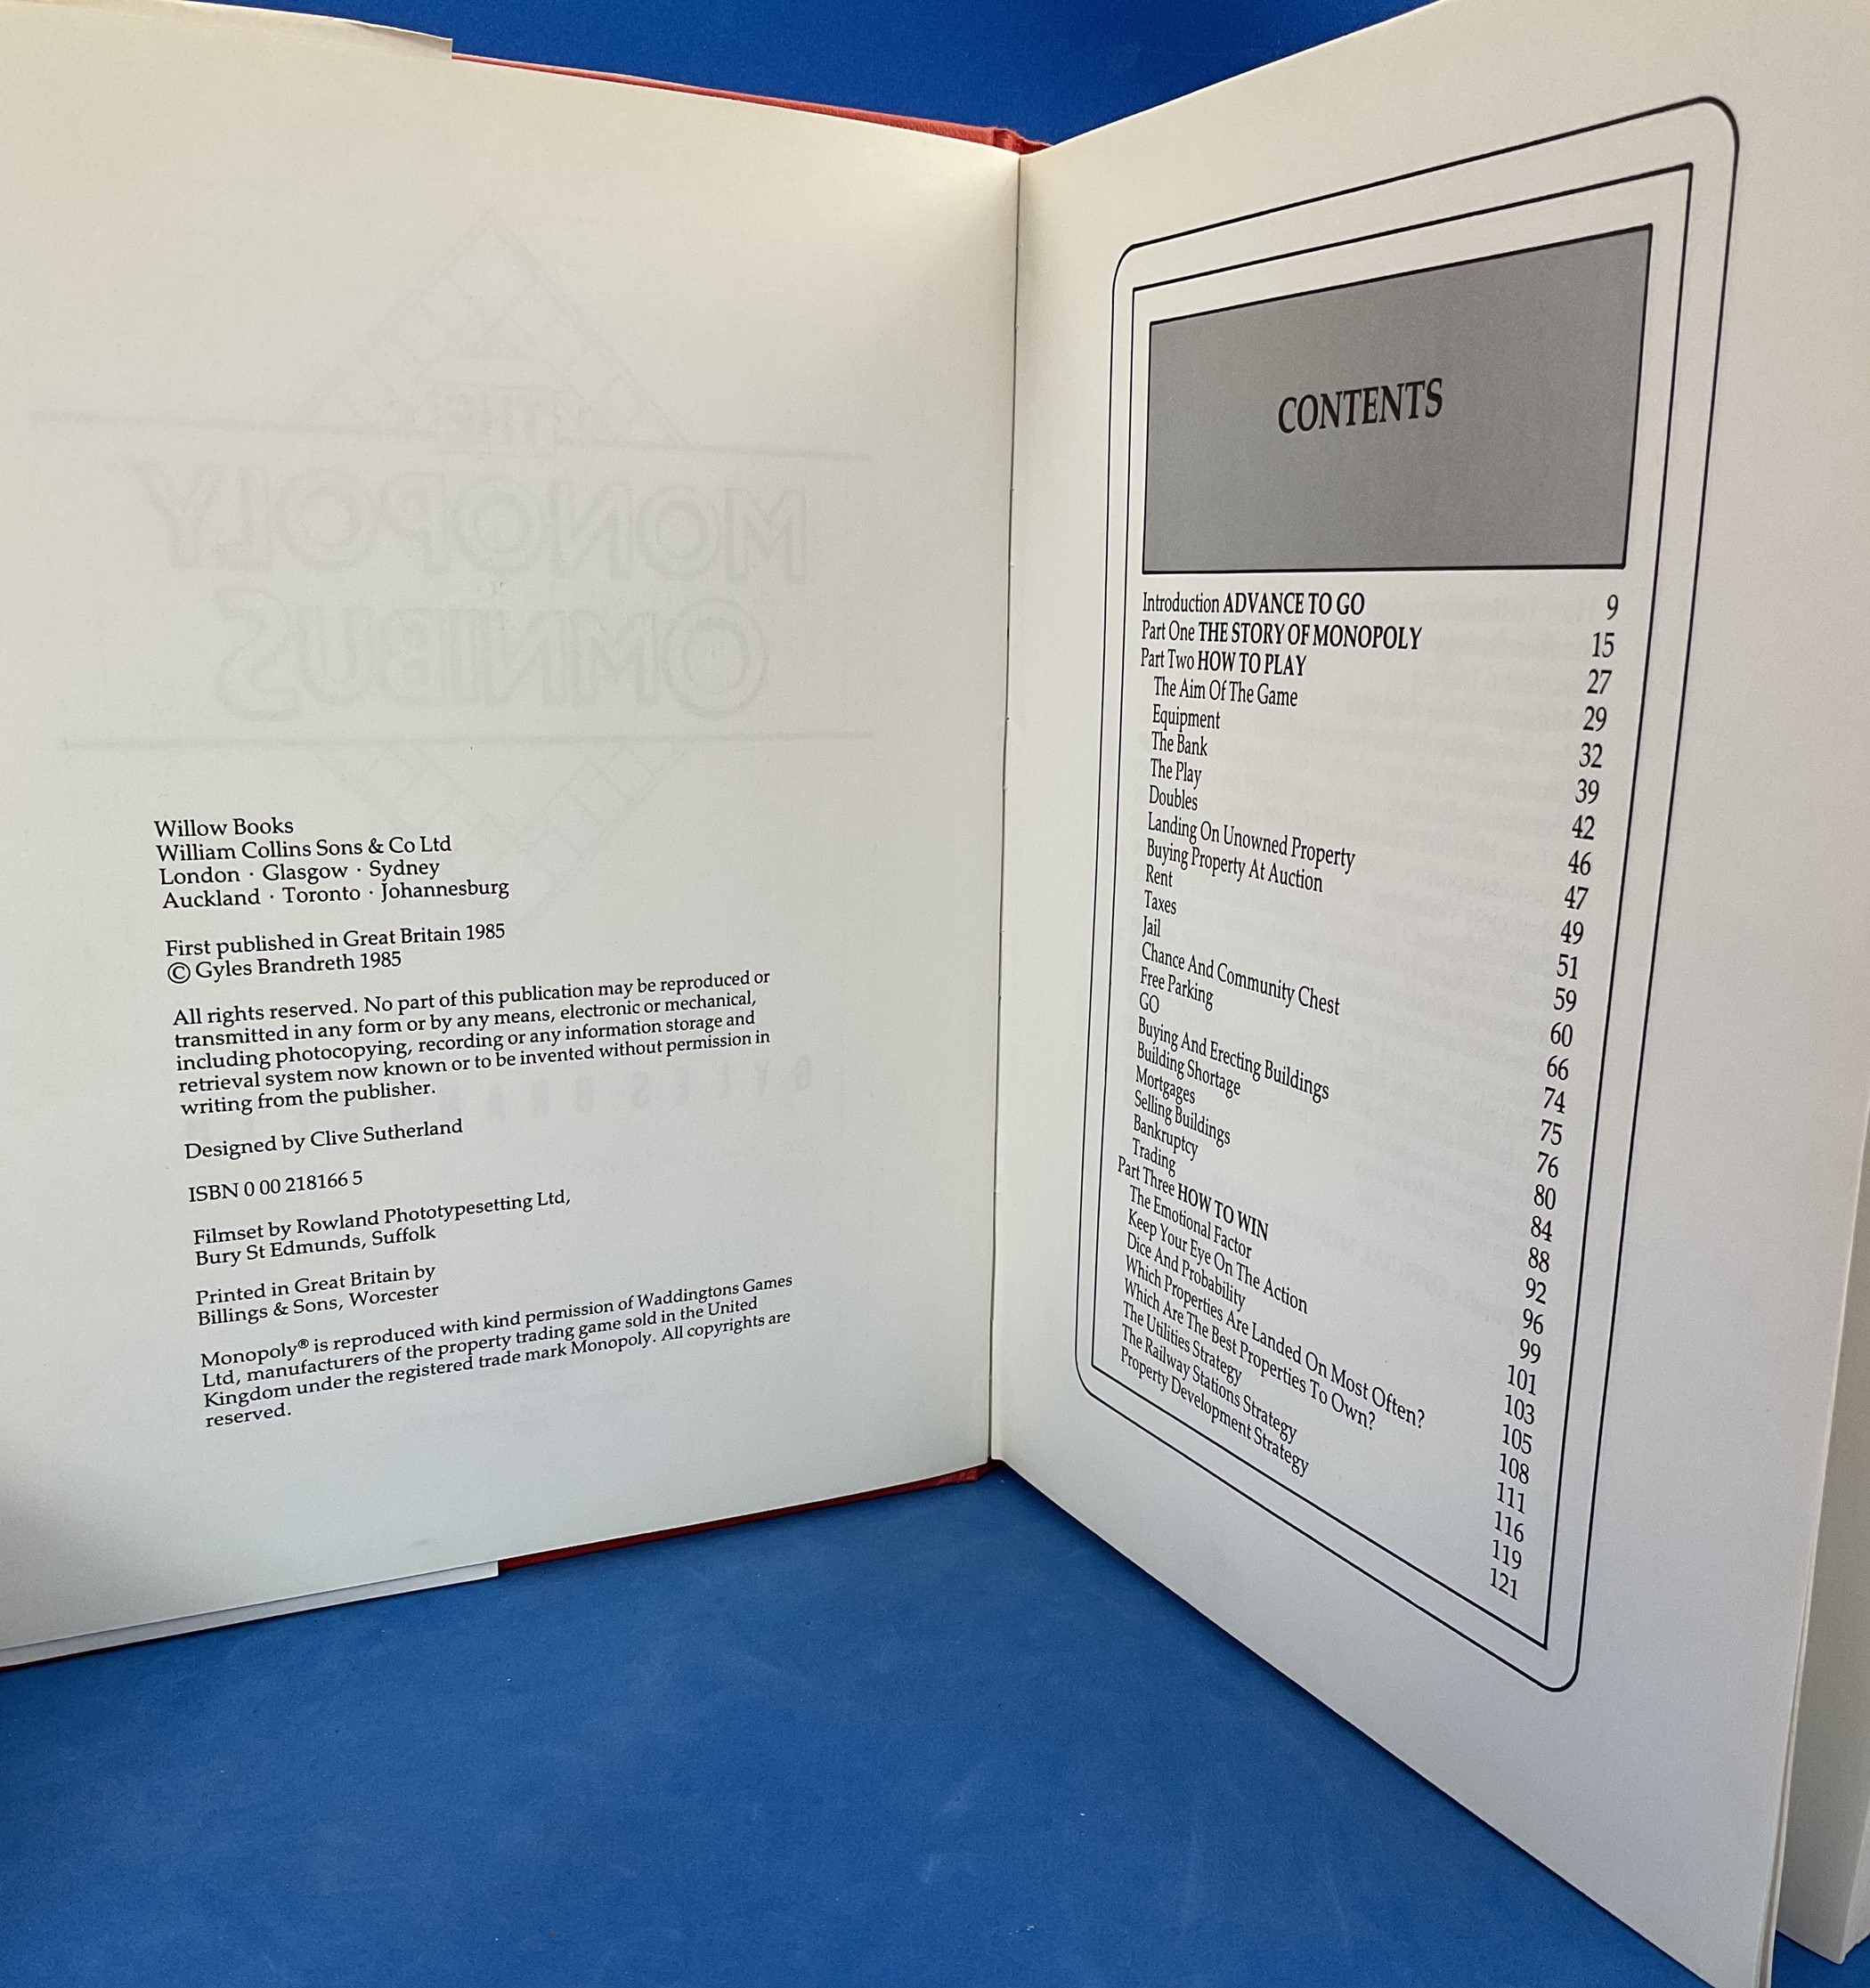 The Monopoly Omnibus 1st Edition Hardback Book by Gyles Brandreth. Published in 1985. 224 Pages. - Image 2 of 2